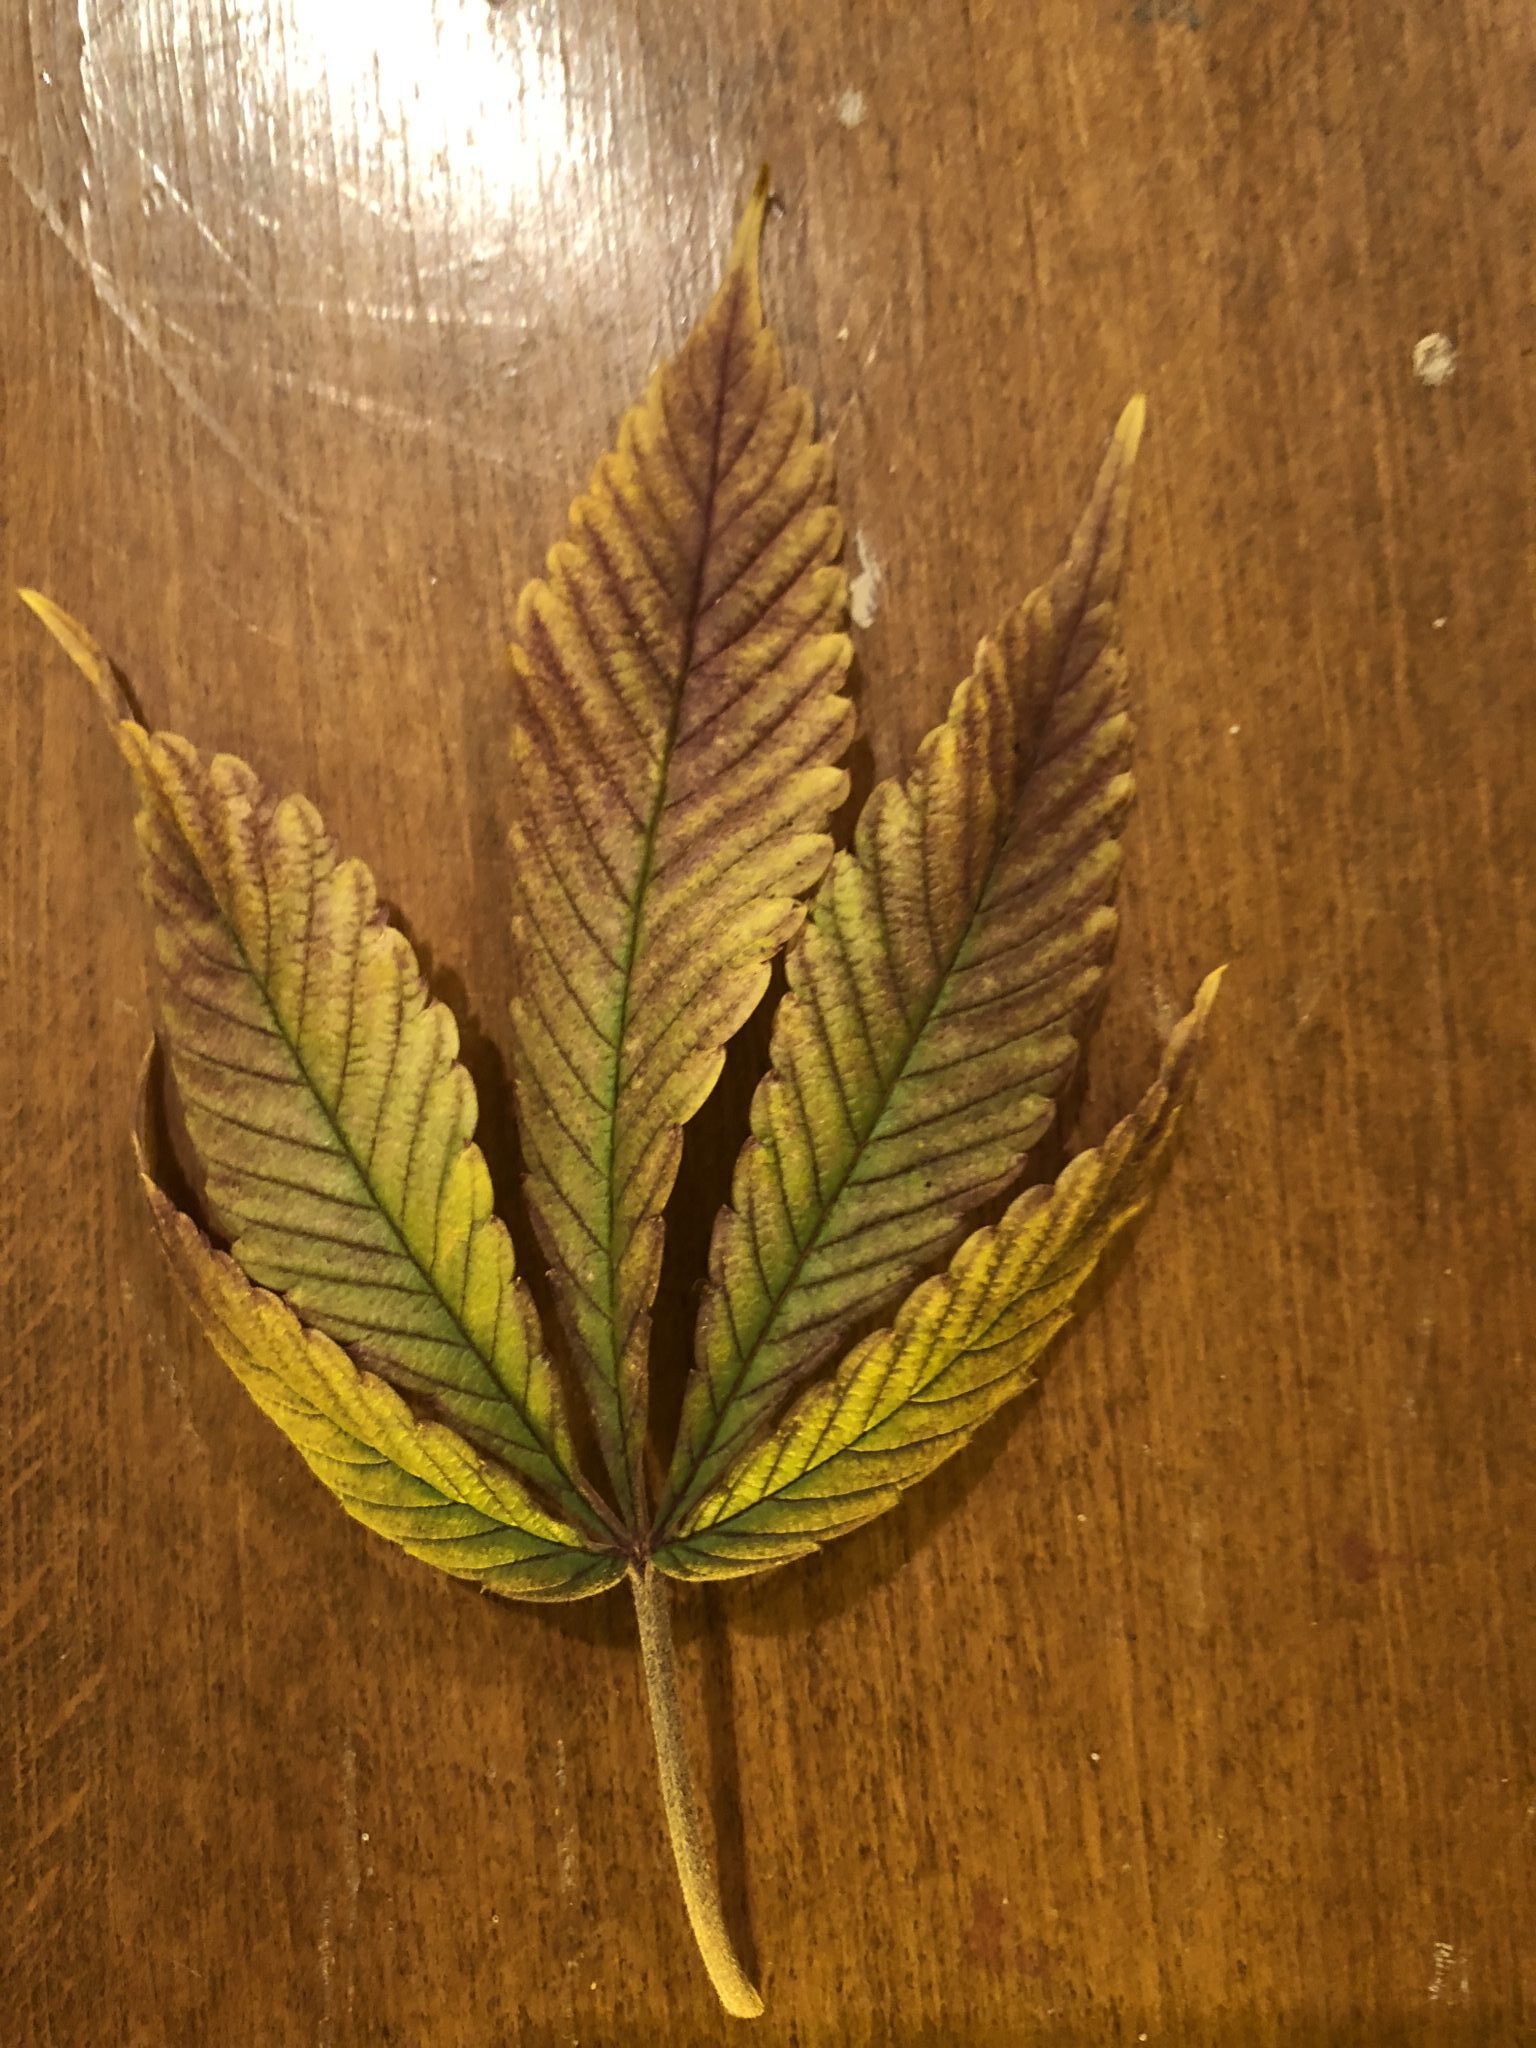 Fan Leaves turning purple and falling off?